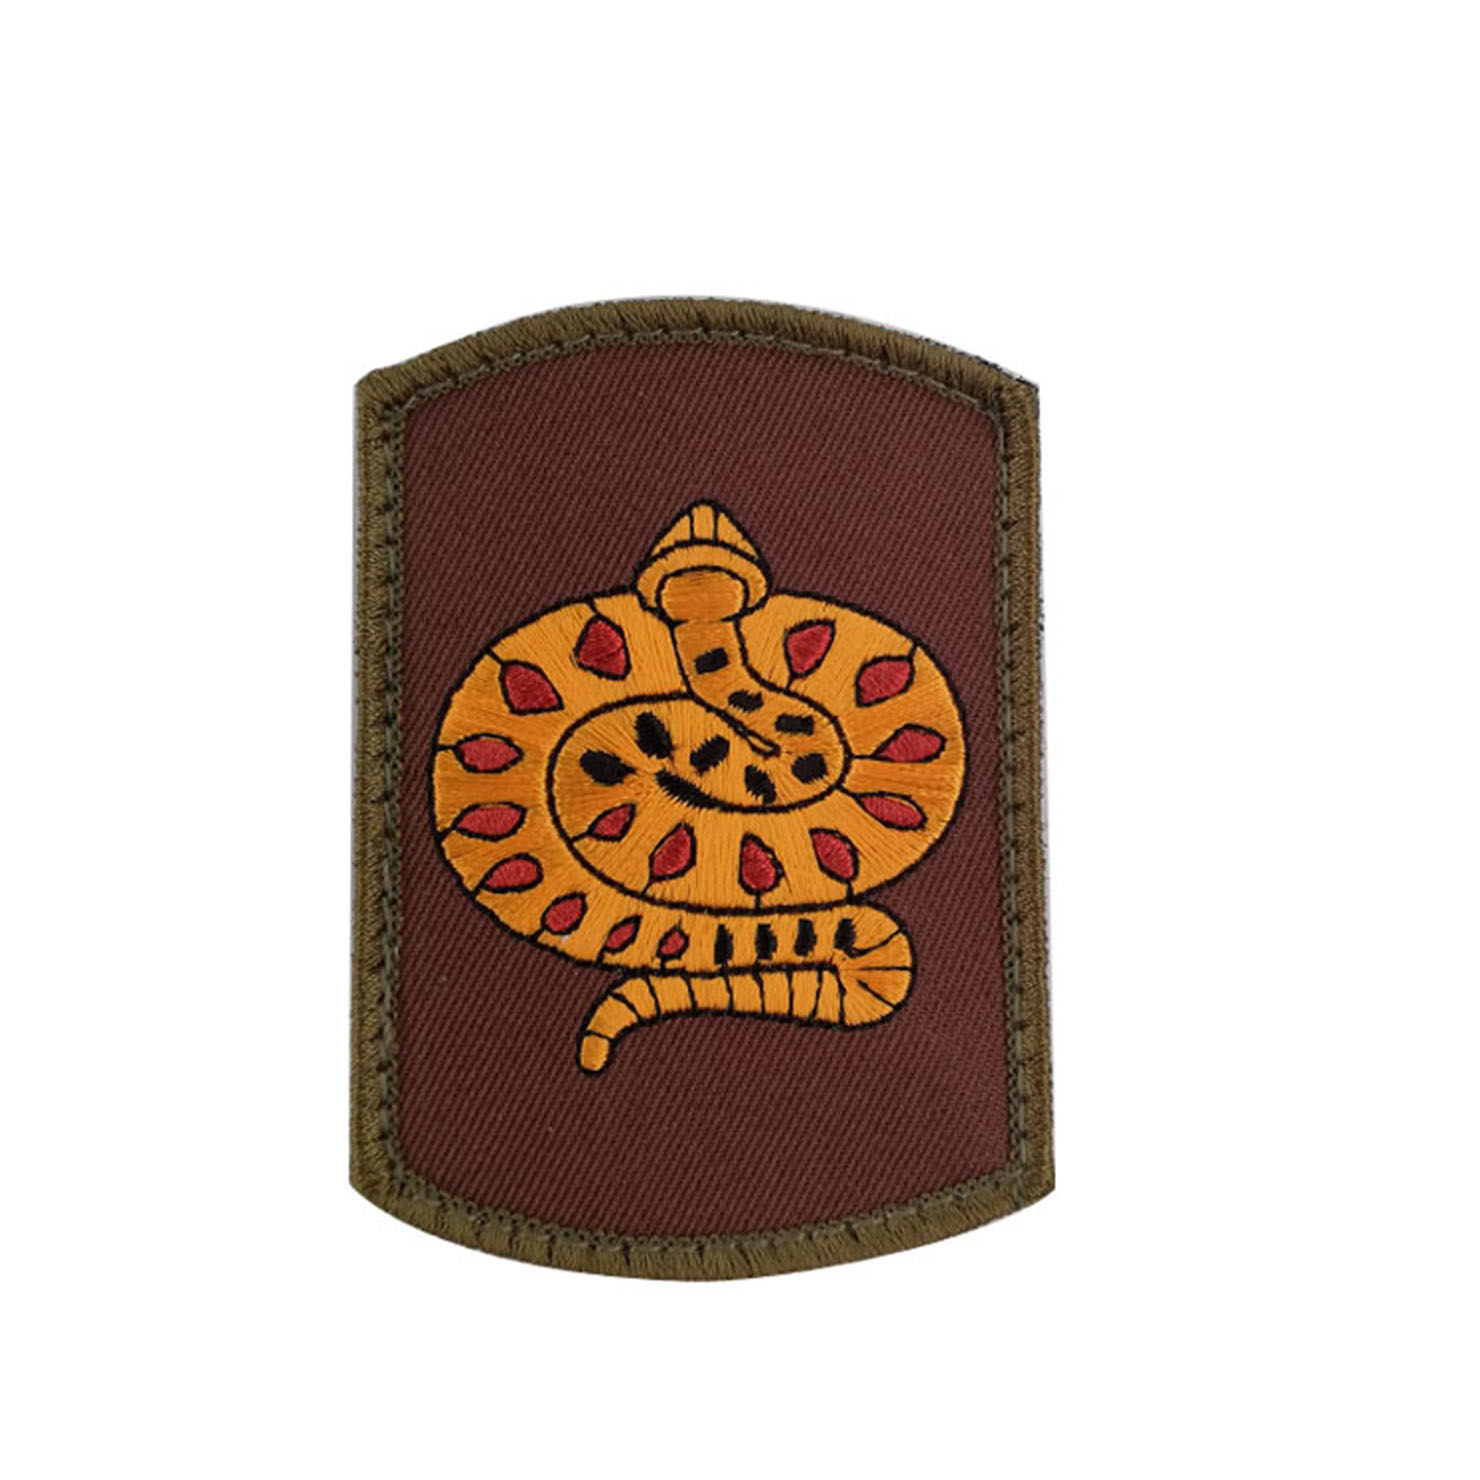 Low Cost clothing Promotion PVC Patch